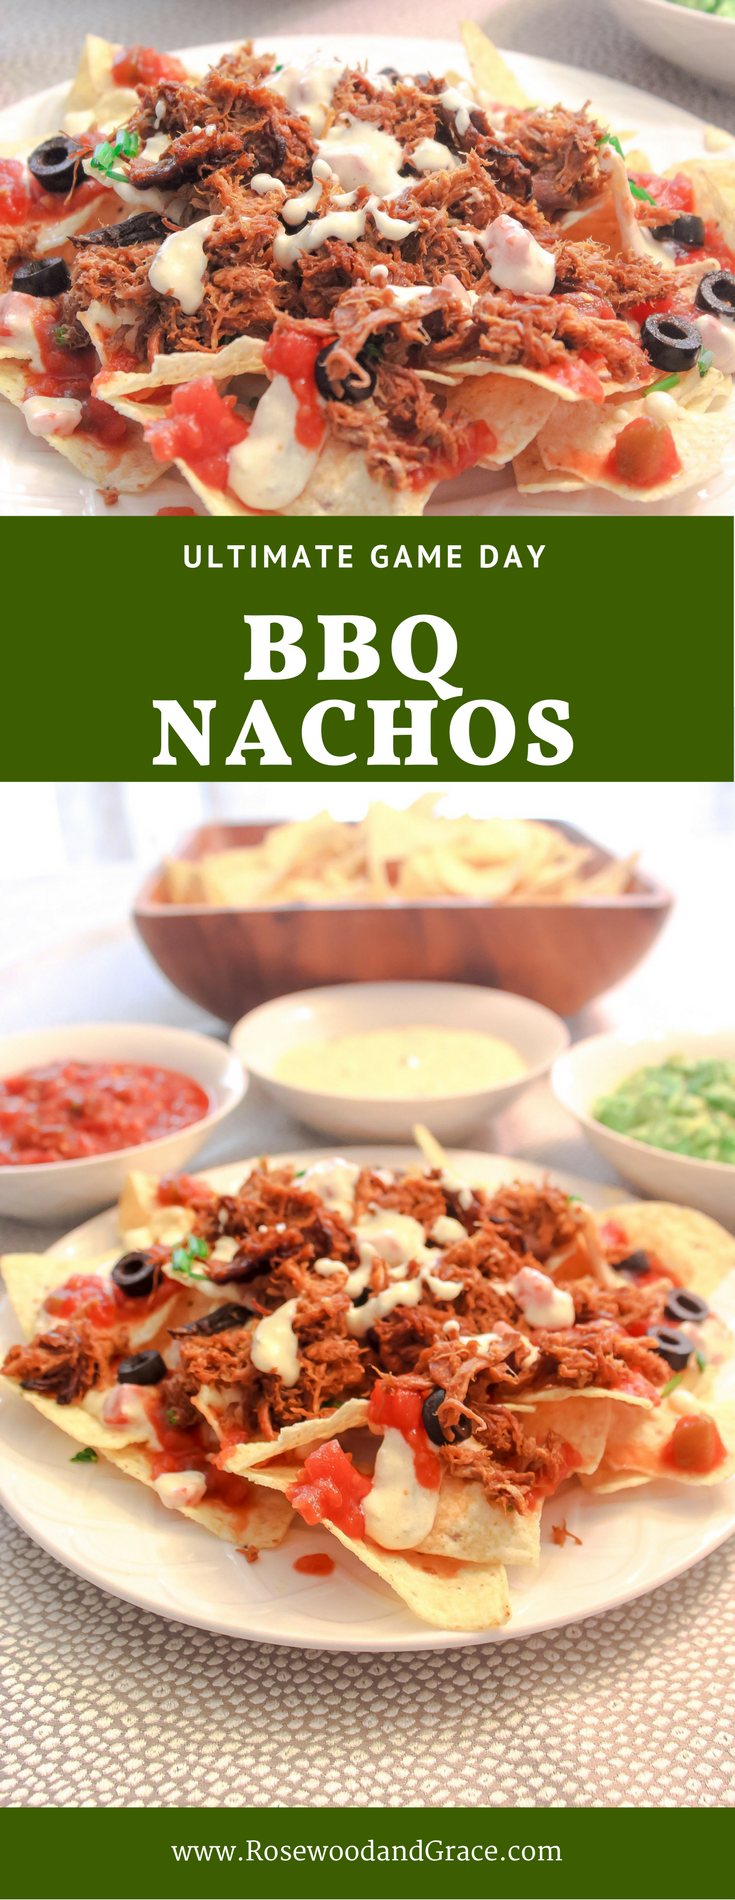 These Ultimate Game Day BBQ Nachos are perfect for feeding hungry football fans on Sundays. They're so easy, you'll want to make them every Sunday!